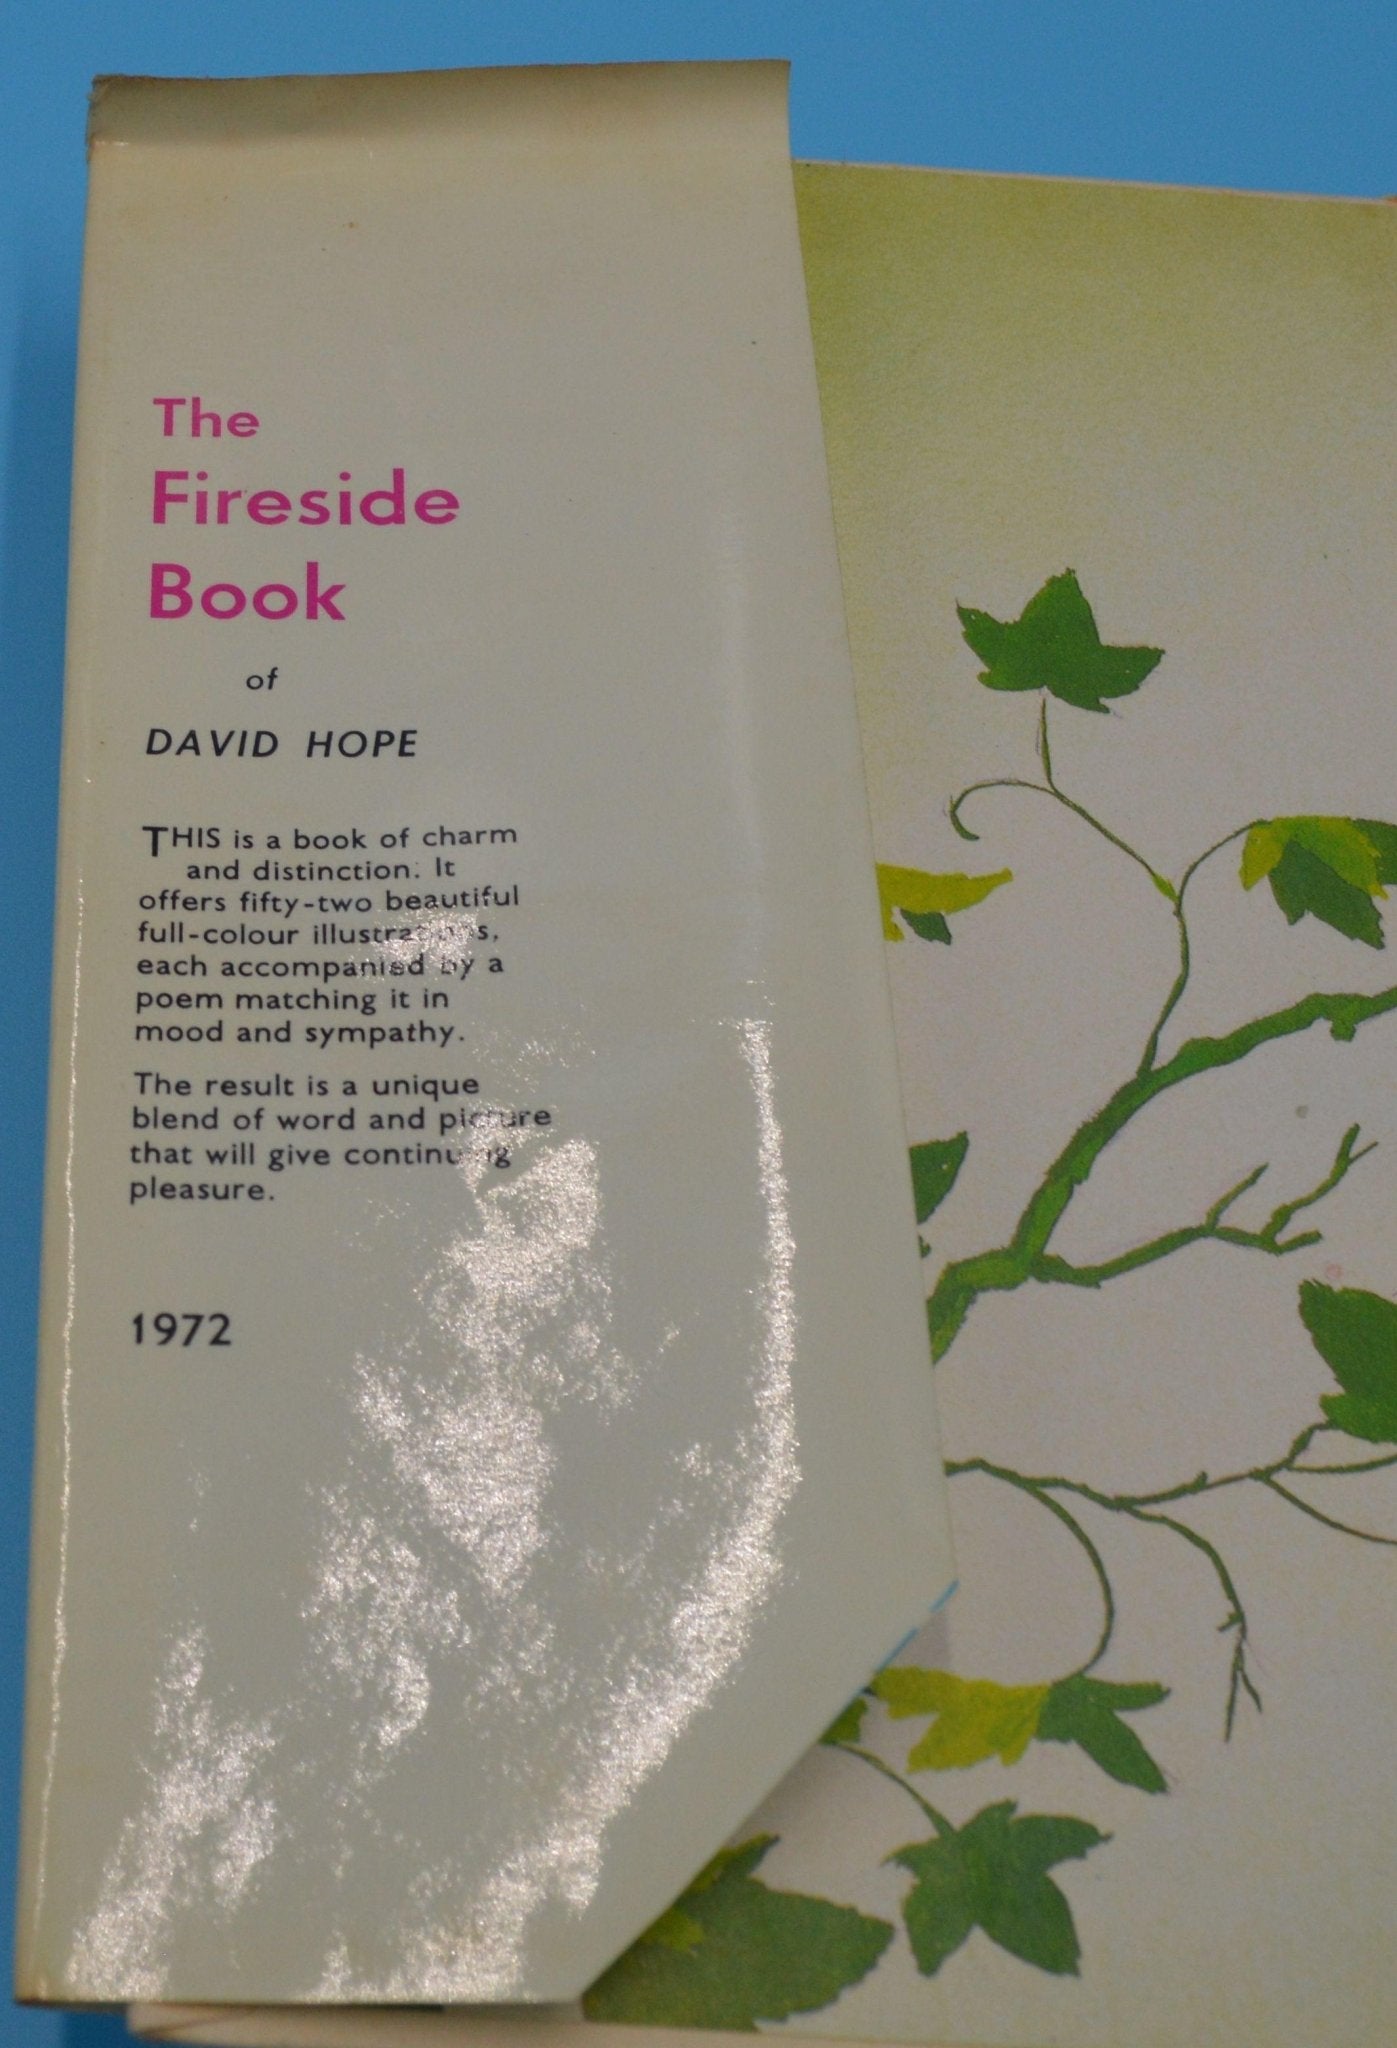 THE FRIENDSHIP BOOK 1972 & THE FIRESIDE BOOK 1972 - TMD167207